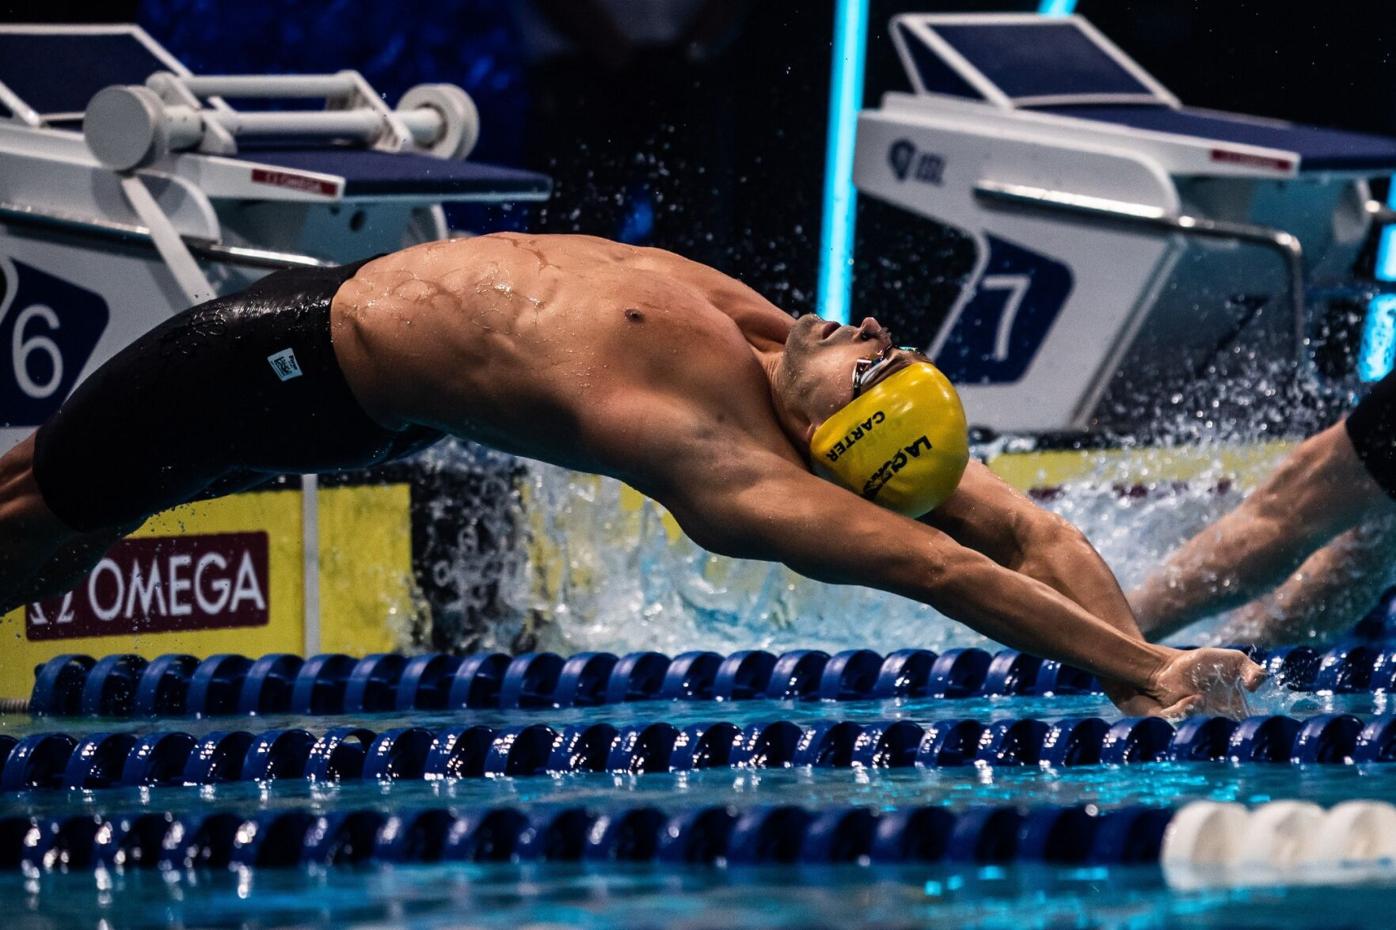 (flashback) FULL STRETCH: Los Angeles Current’s Dylan Carter gets off to a quick start in the Men’s 100m backstroke, during match number 10 of the International Swimming League (ISL) 2020, at the Duna Arena in Budapest, Hungary, yesterday. Carter bagged silver in the event, in a new national record time of 50.11 seconds. --Photo courtesy ISL